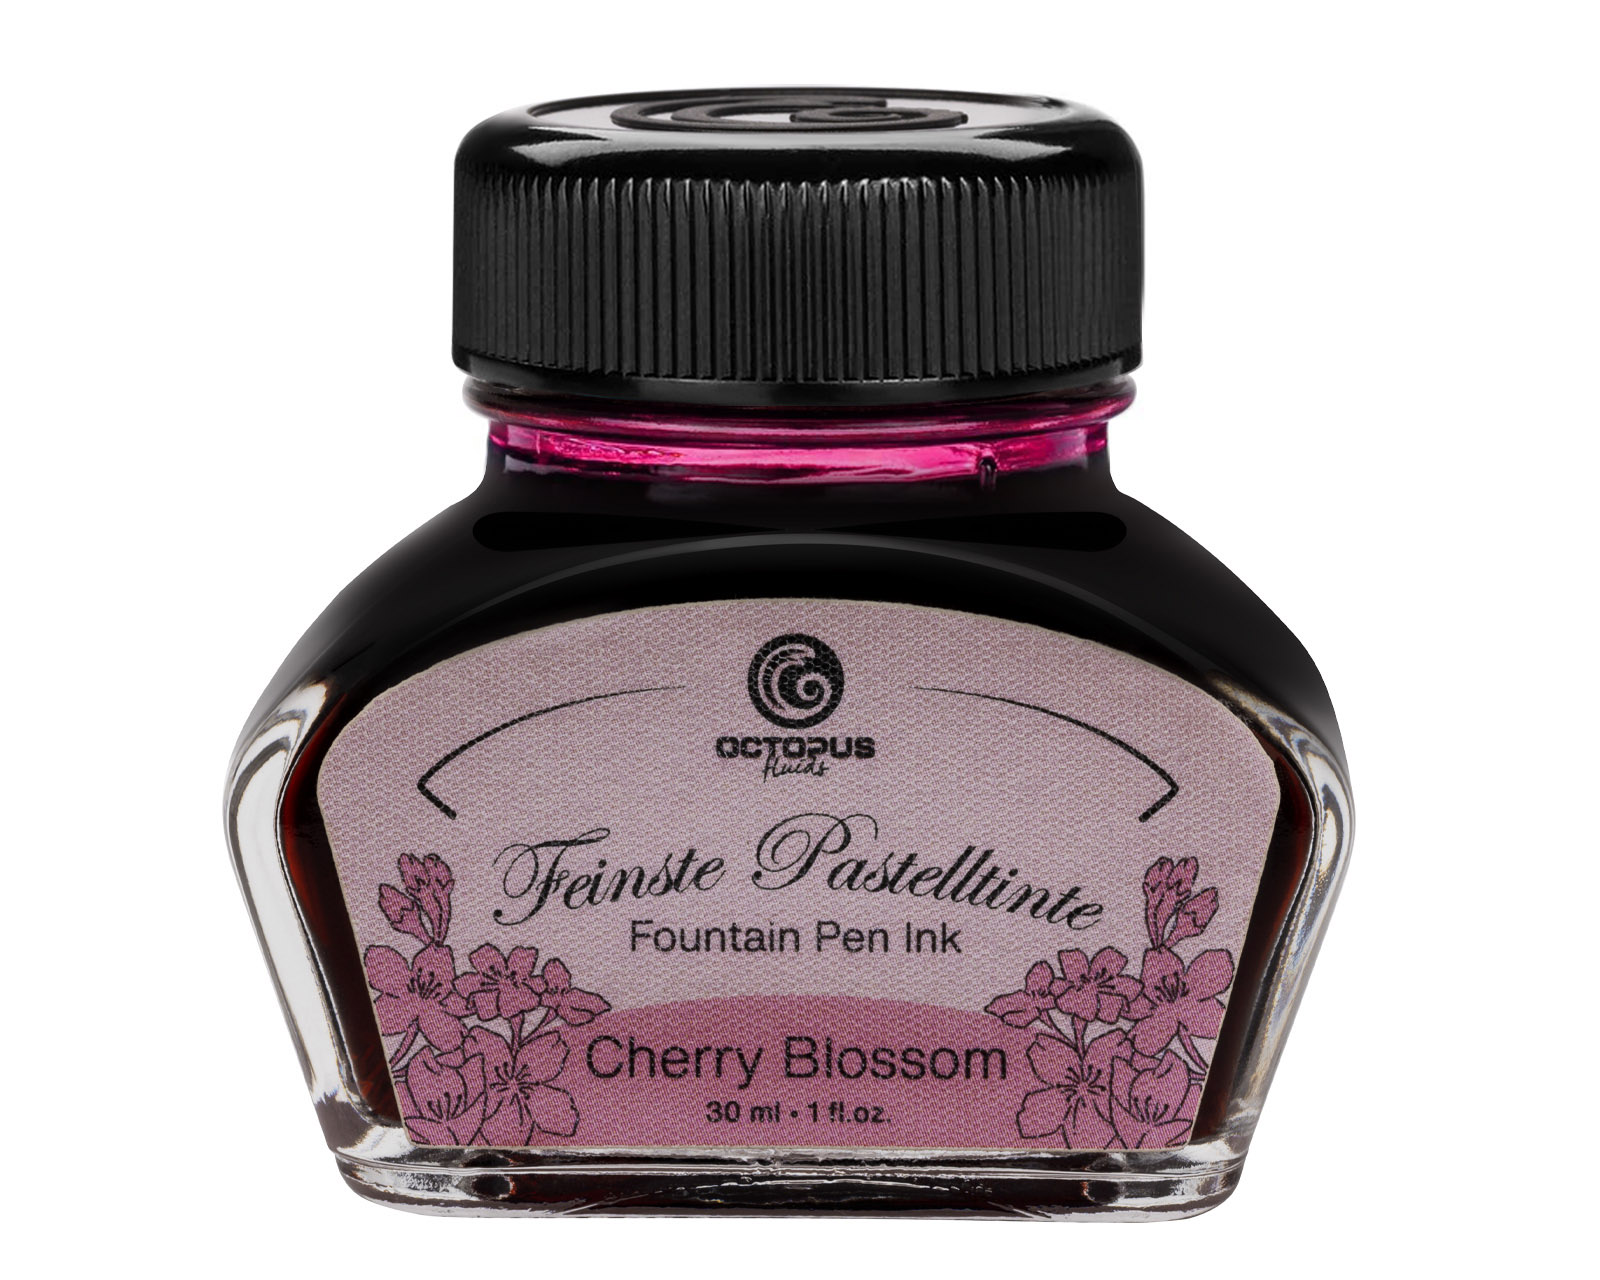 Fountain pen ink pastel rose "Cherry Blossom"